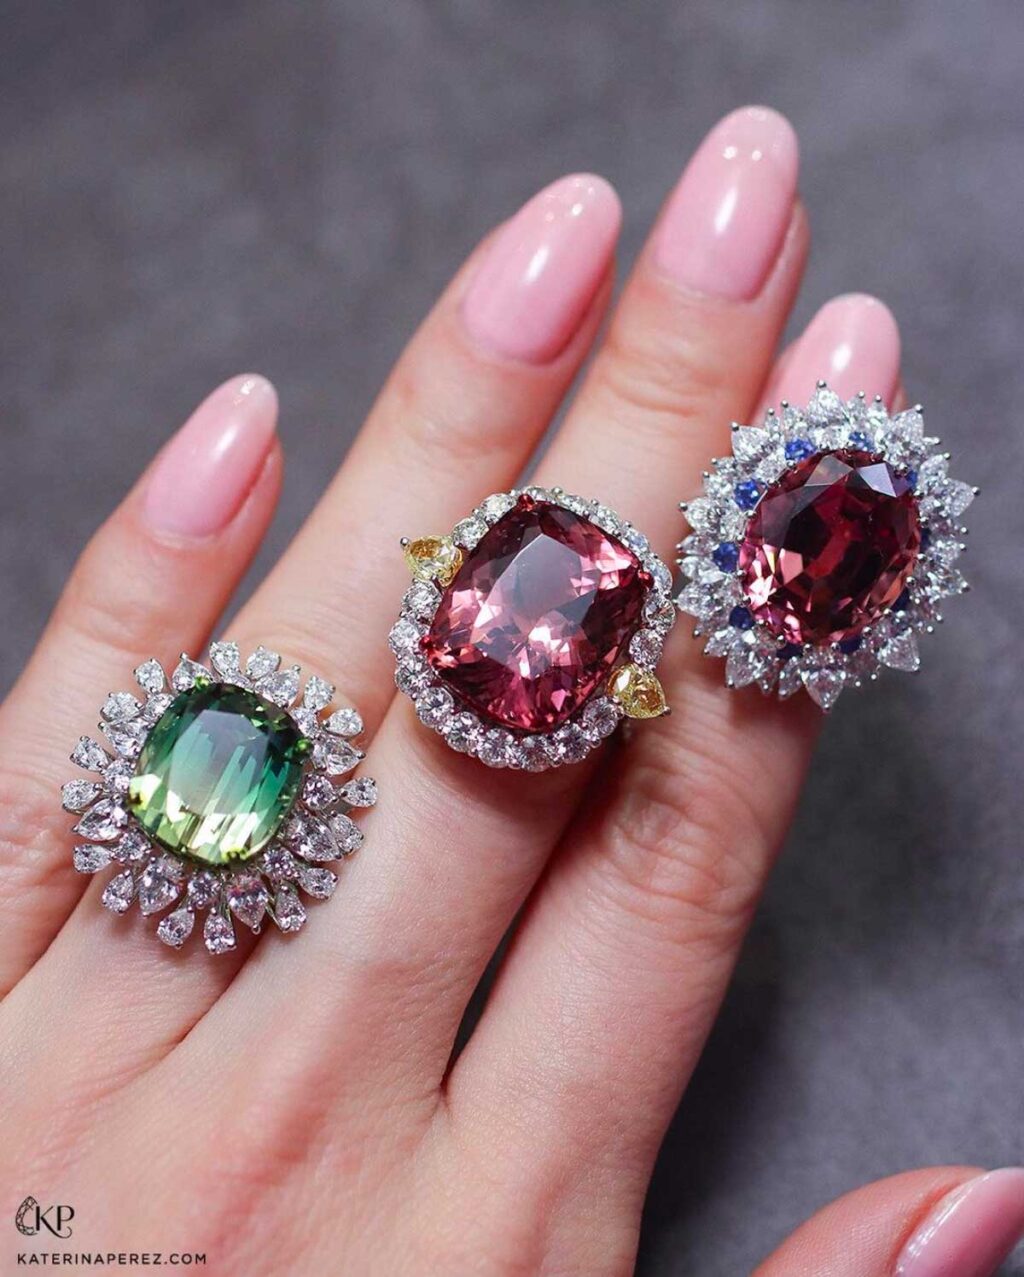 Why do people wear cocktail rings?